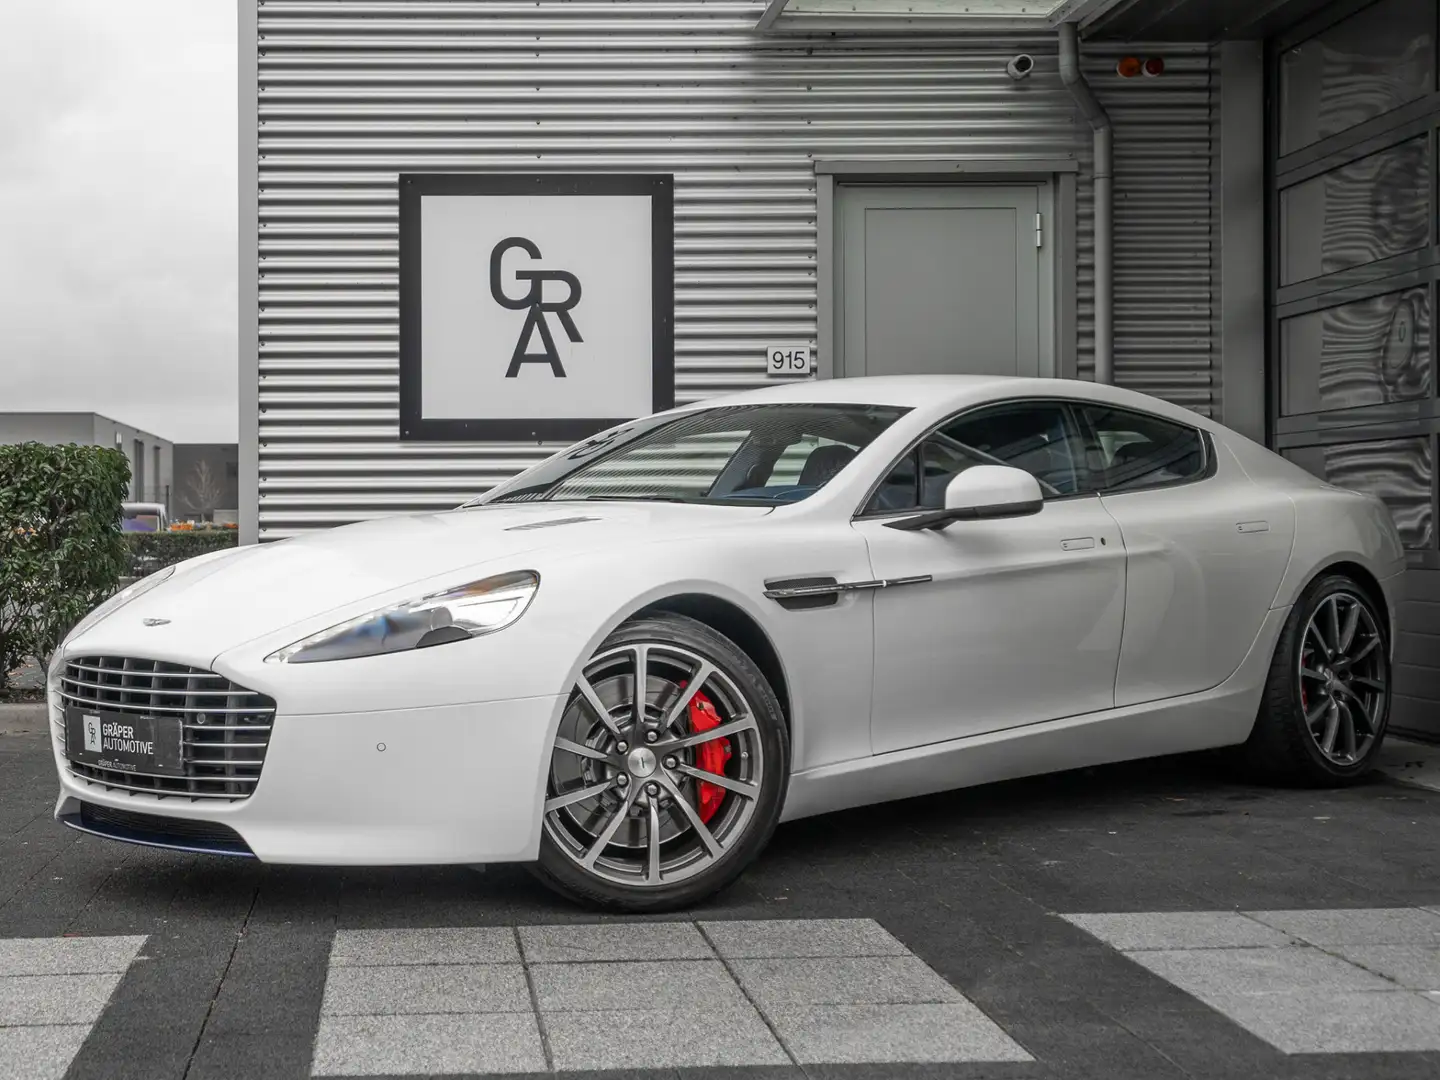 Aston Martin Rapide S 6.0 V12 ‘Britain is Great’ Edition by Q 1/8 Biały - 2